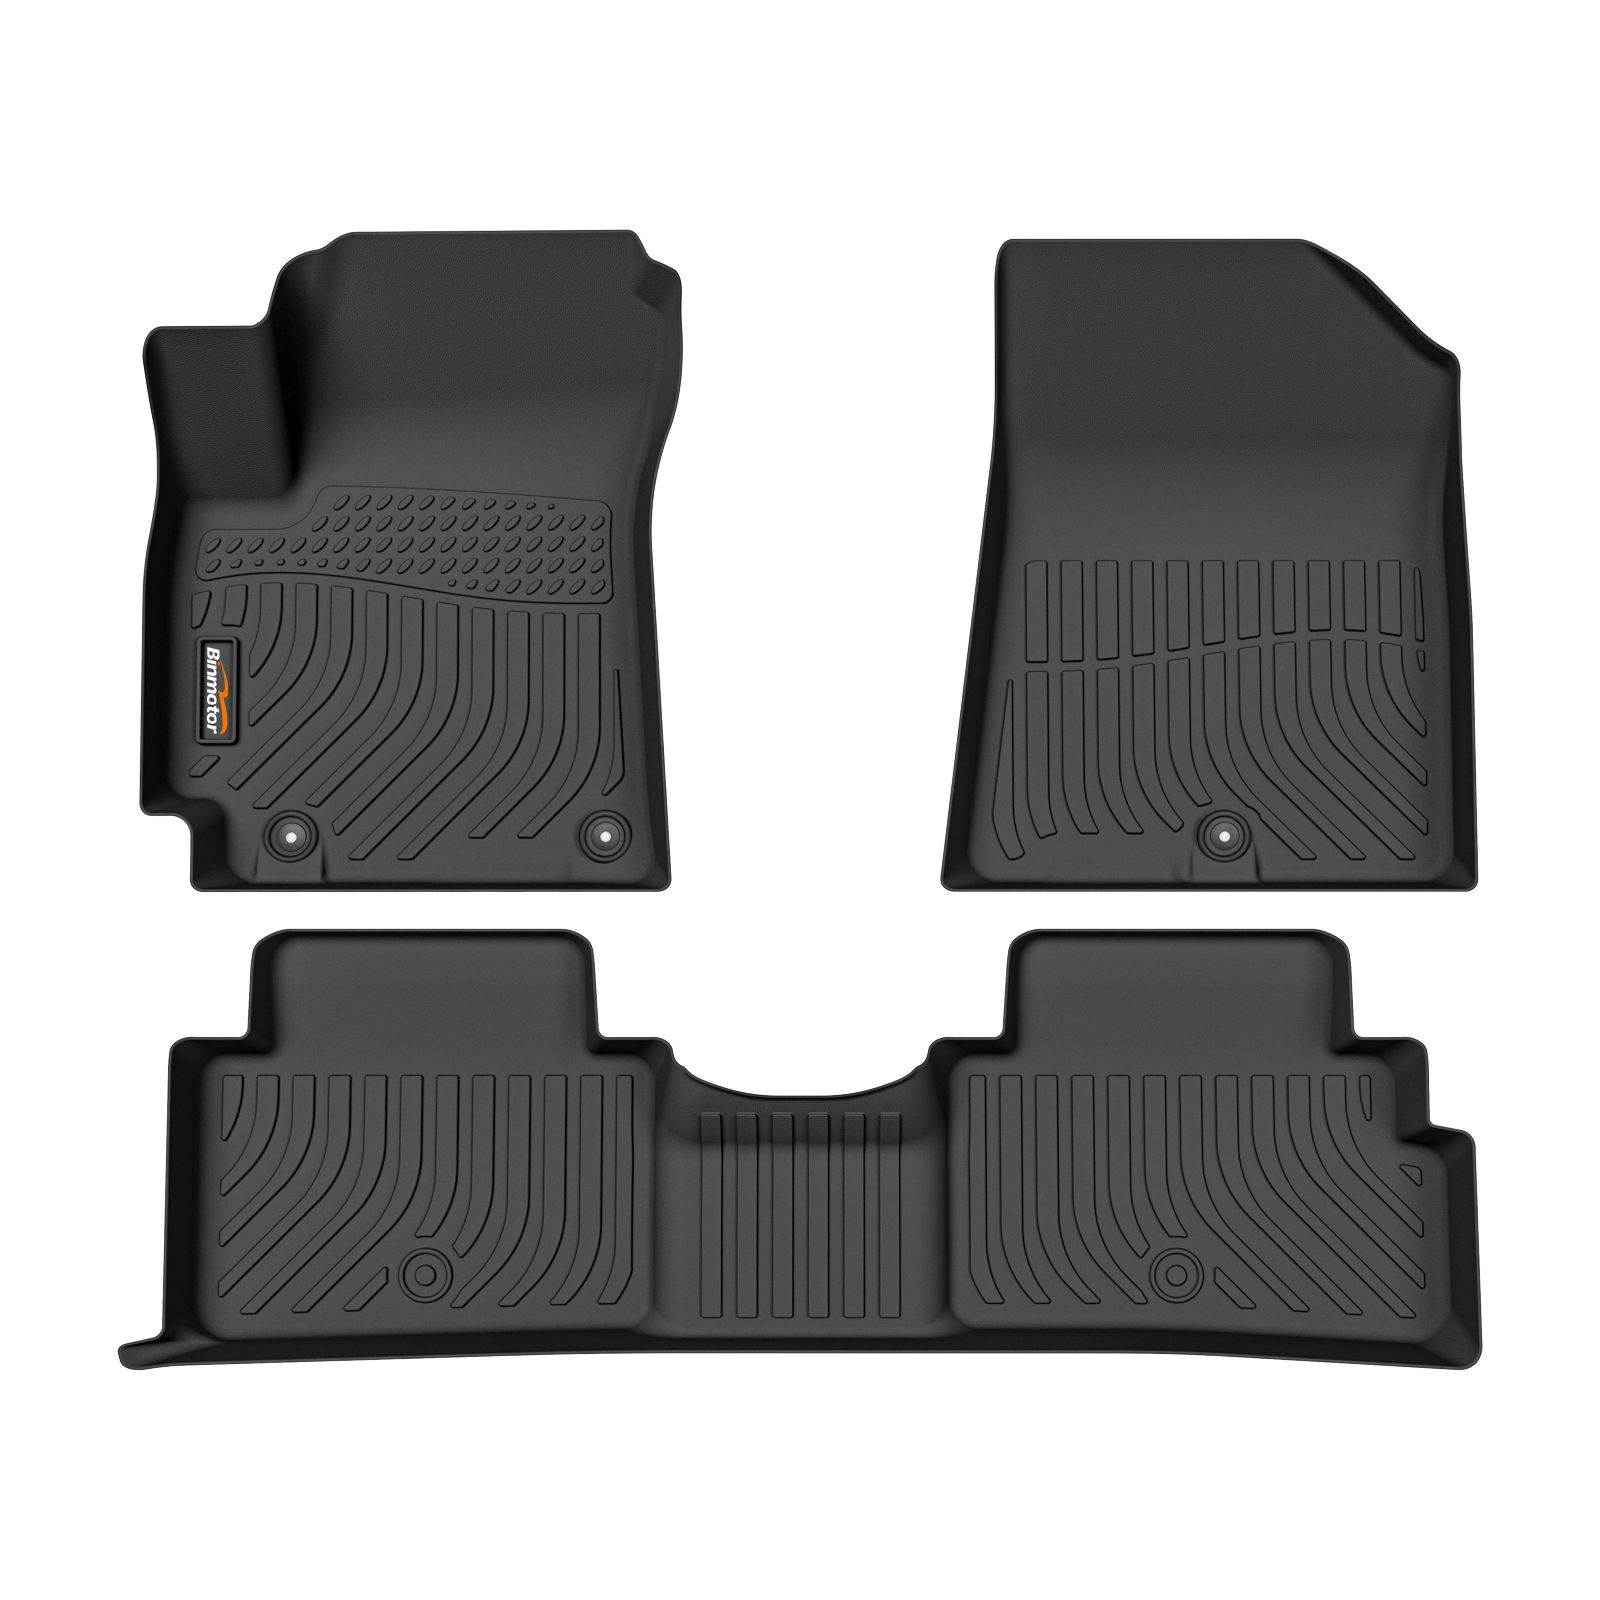 Binmotor-Floor Mats for Kia Soul , 1st & 2nd Row, Floor Liners Fits for Kia Soul, Car Floor Mats Custom Fit for Kia Soul（compatible year 2020-2024）